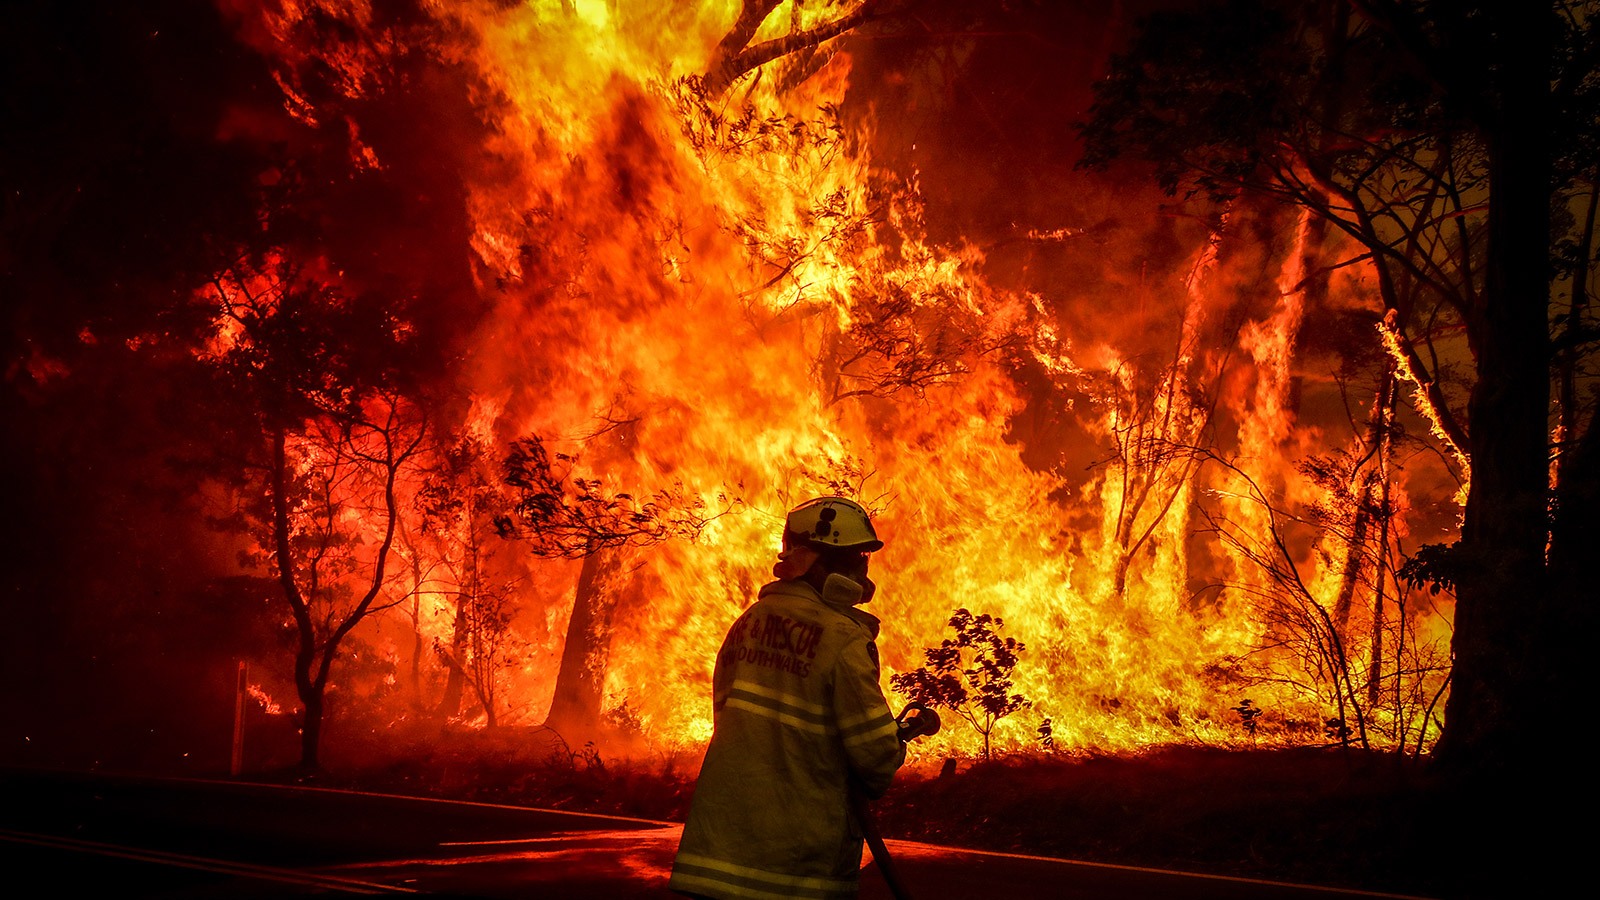 Sydney Fire, David Gray / Getty Images